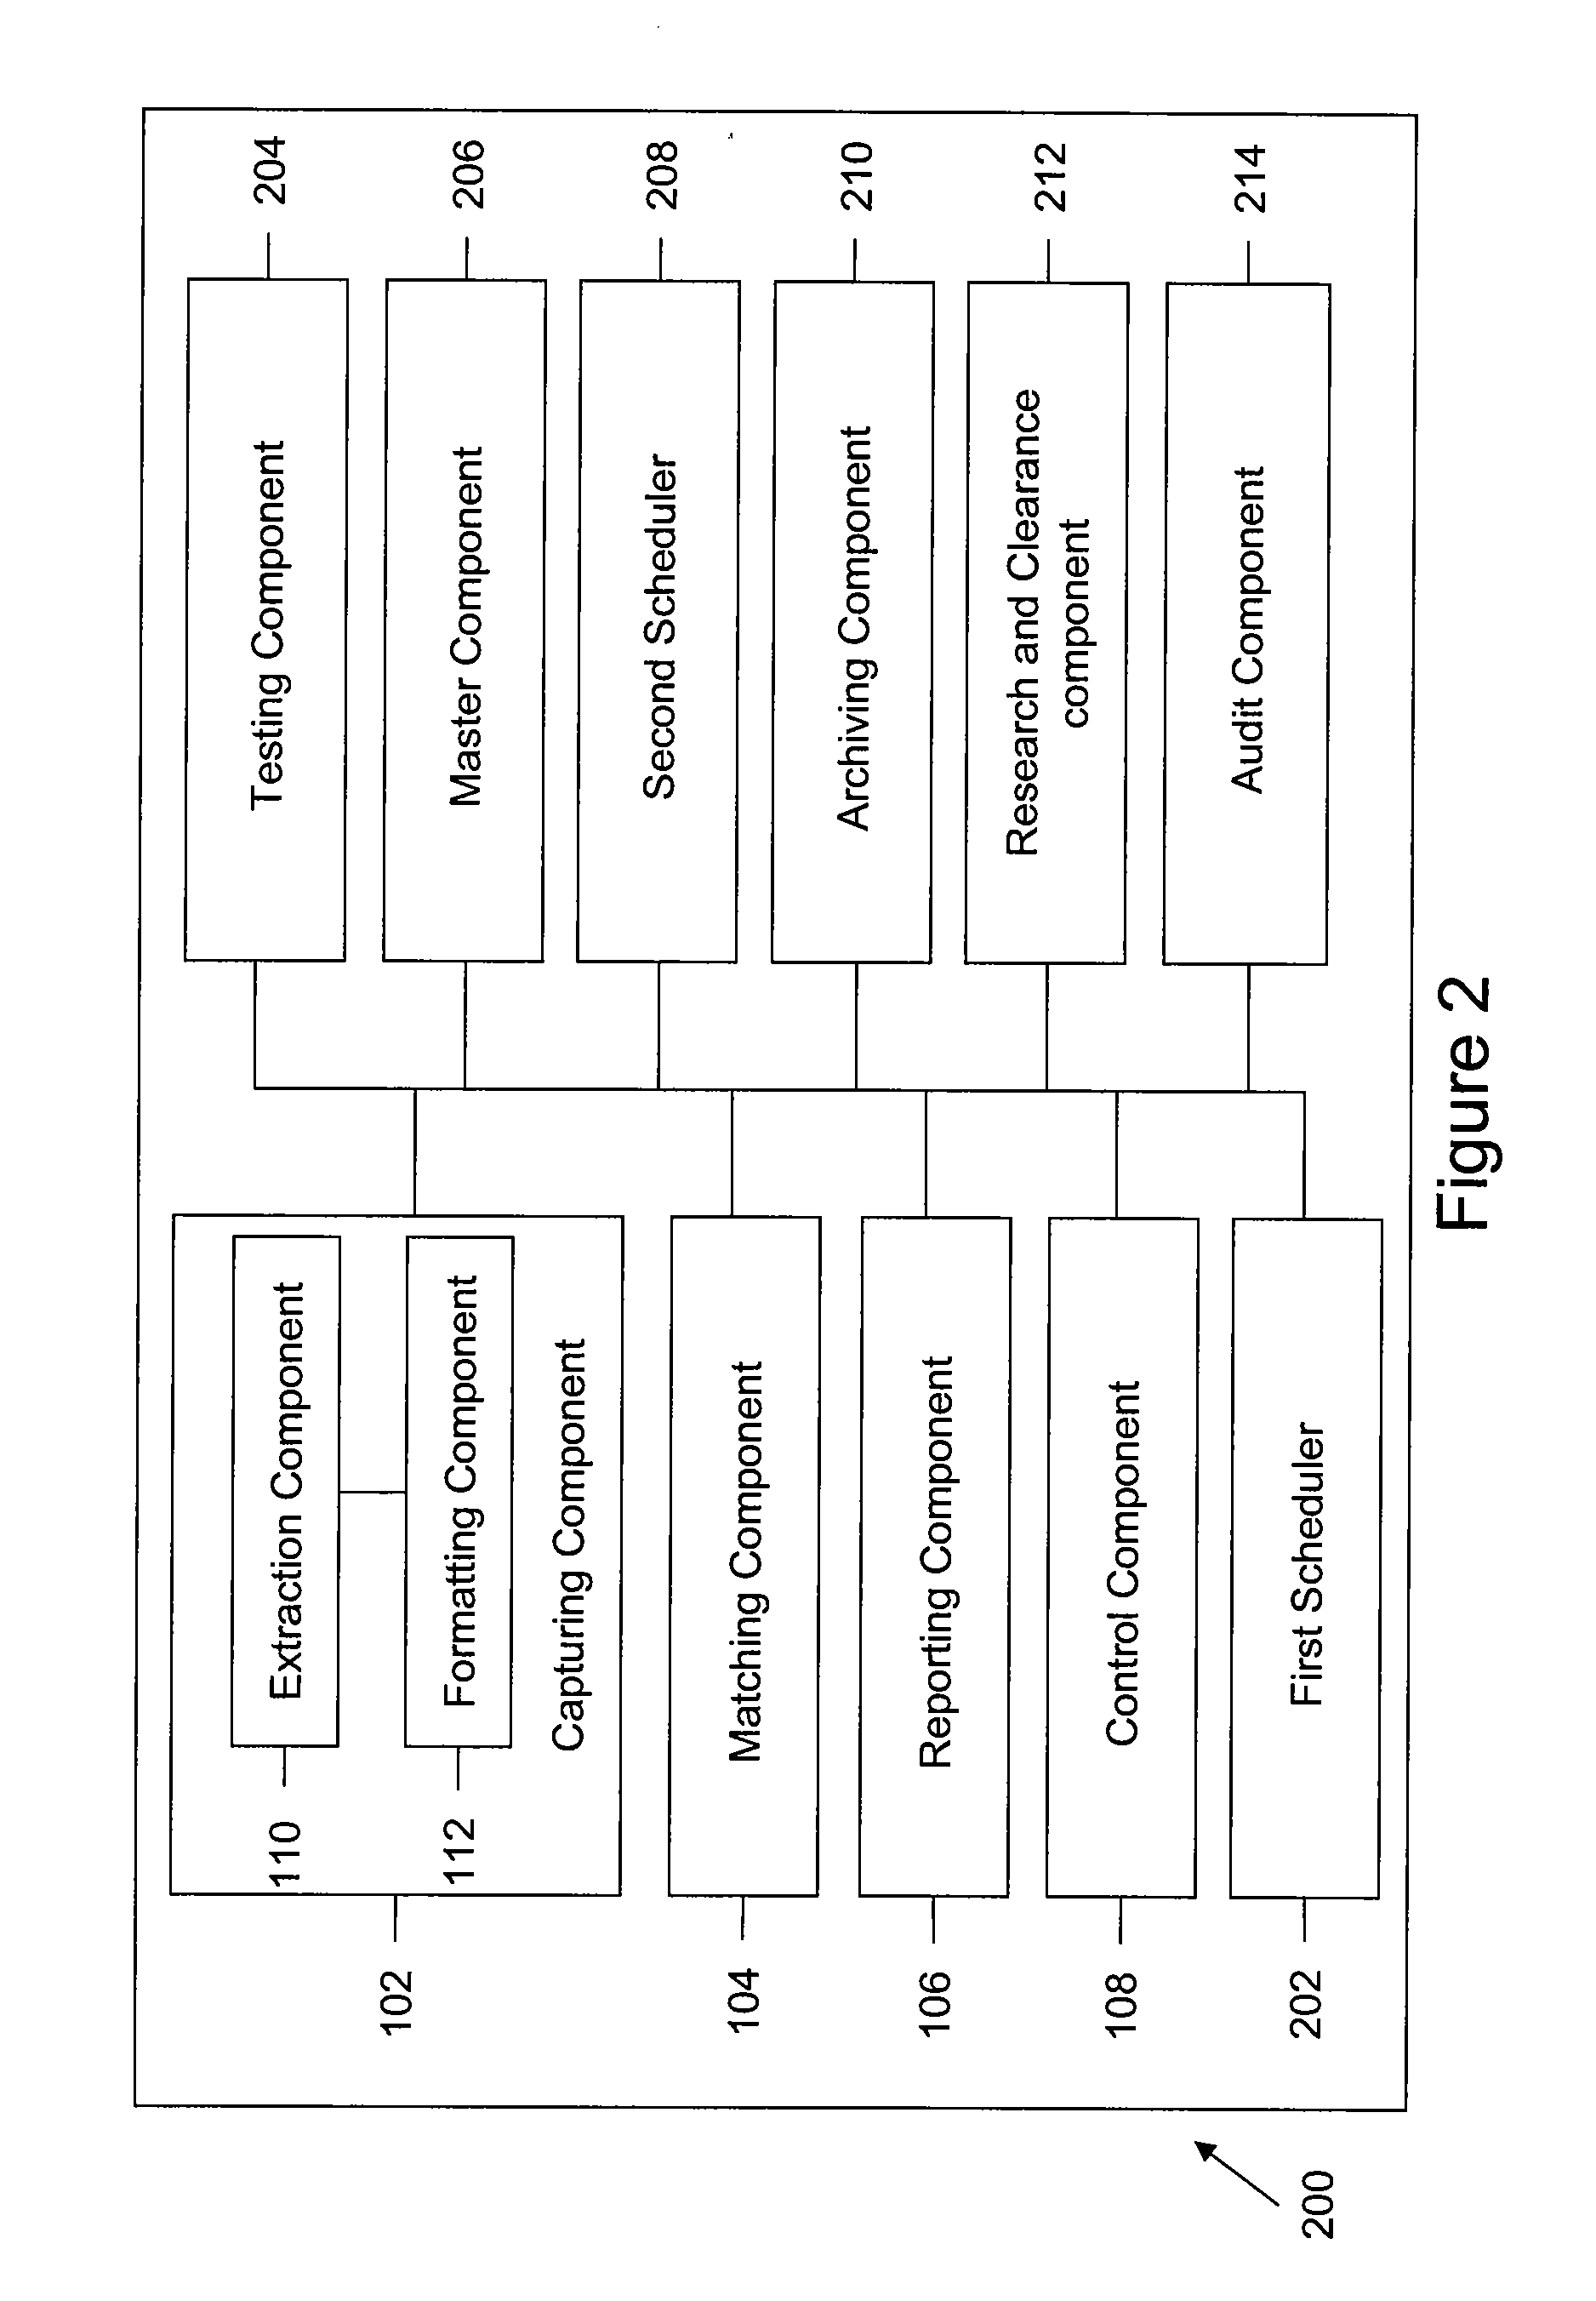 System and Method for Reconciling One or More Financial Transactions